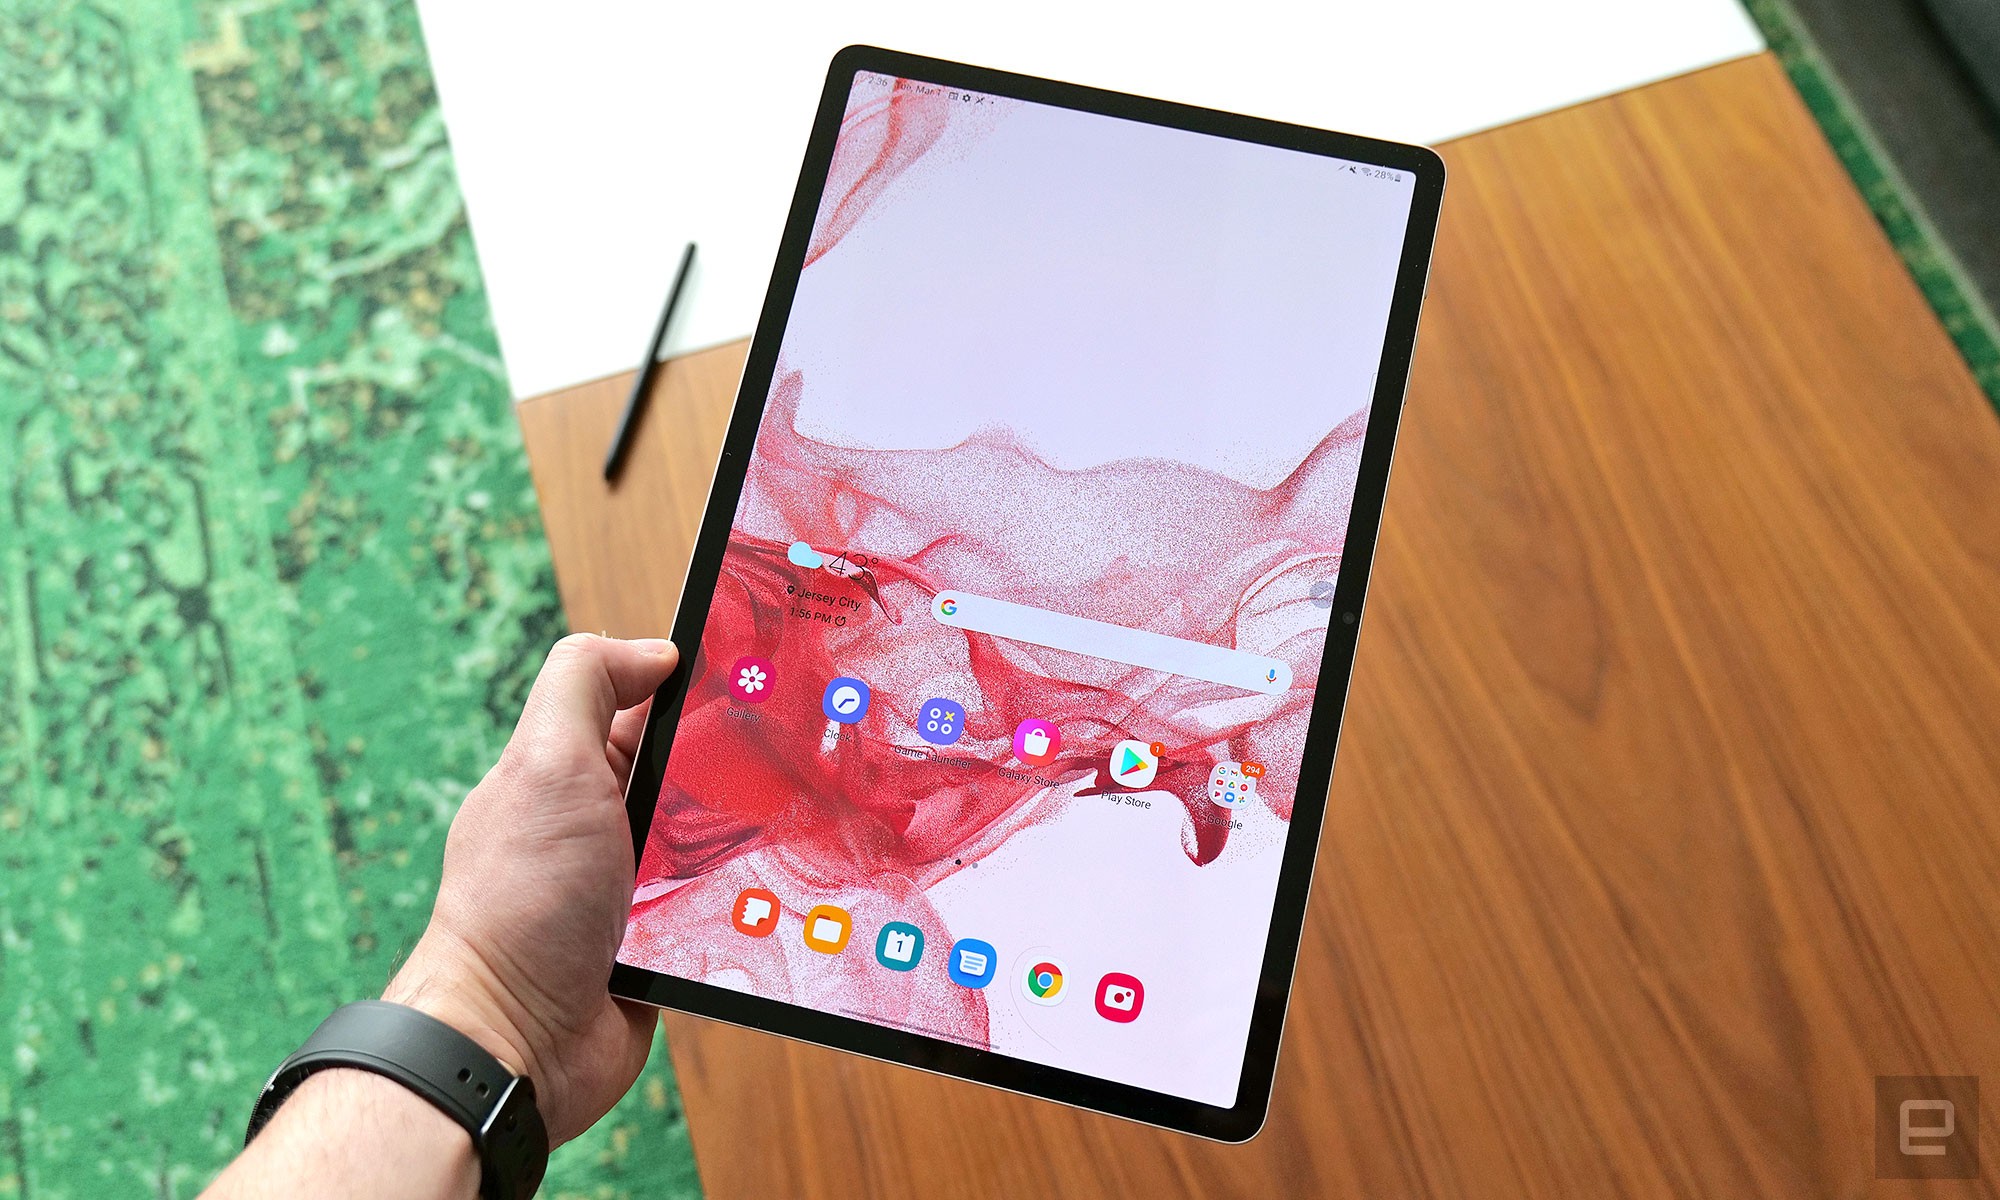 The Galaxy Tab S8+ features a 12.4-inch screen natively stylus support, and an included S Pen." data-uuid="34694fea-88b6-3791-9d63-8fbc6e7adfed